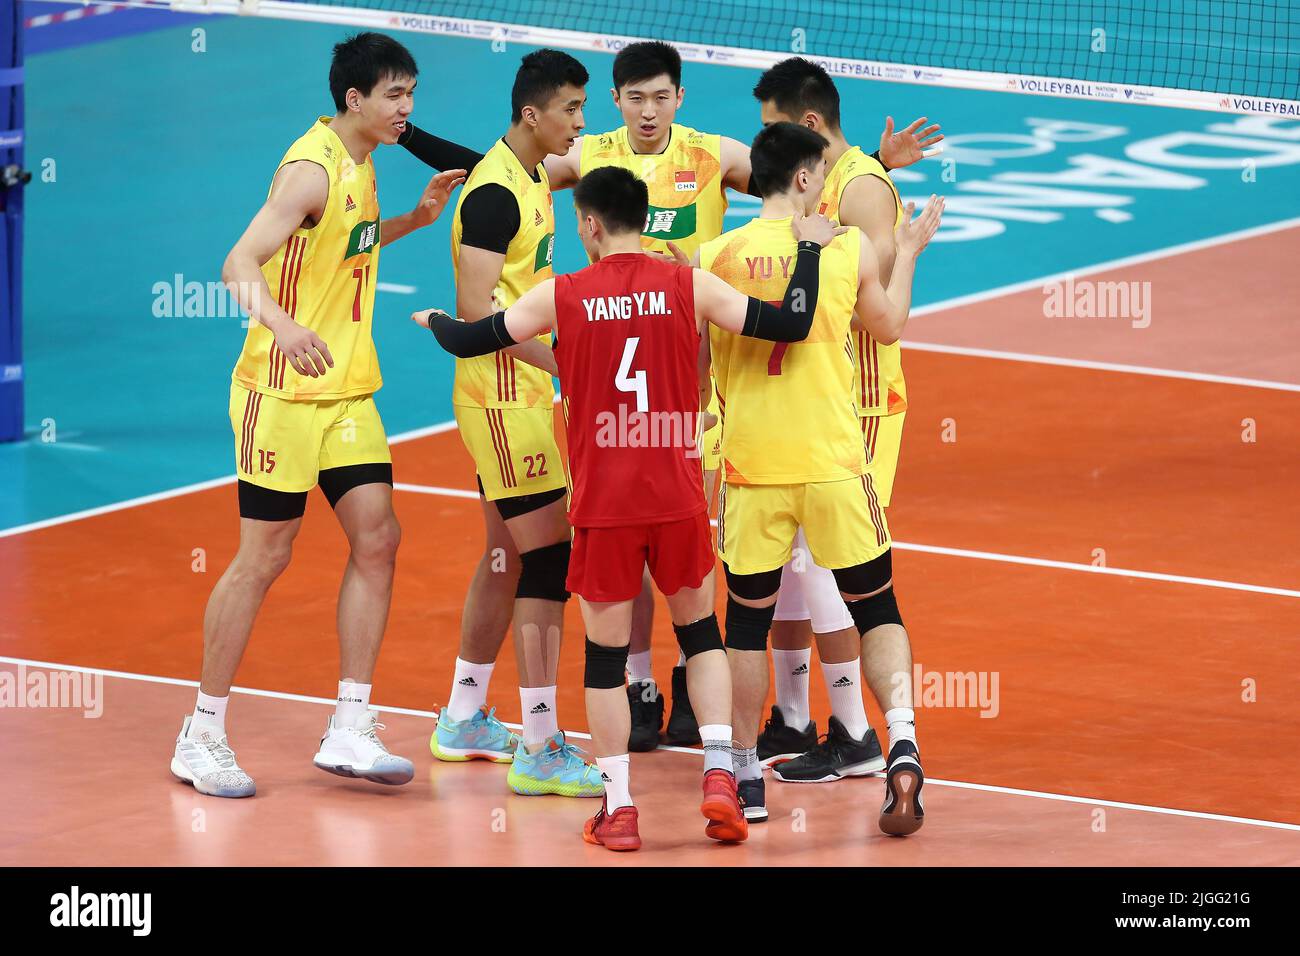 Gdansk, Poland. 10th July, 2022. Shikun Peng Jingyin Zhang Binglong Zhang during the FIVB Volleyball Nations League Men's Pool 6 match between China and Serbia in Gdansk, Poland on July 10, 2022. (Photo by Piotr Matusewicz/PressFocus/SIPA USA) France OUT, Poland OUT Credit: Sipa USA/Alamy Live News Stock Photo